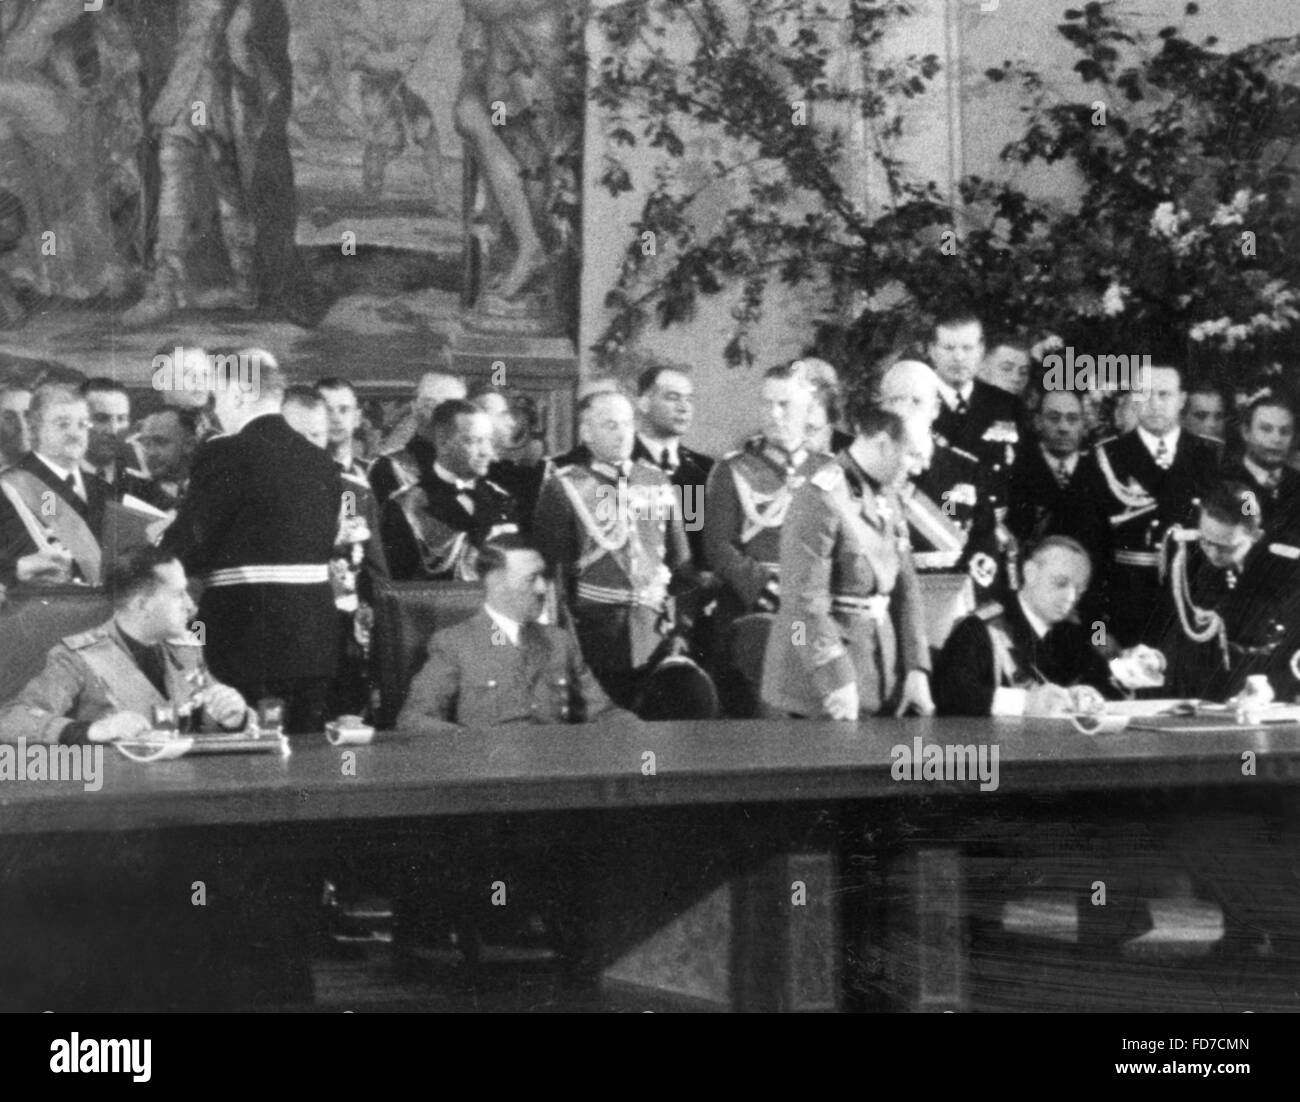 Ciano, Hitler and Ribbentrop at the signing of the German-Italian alliance pact, 22/05/1939 Stock Photo